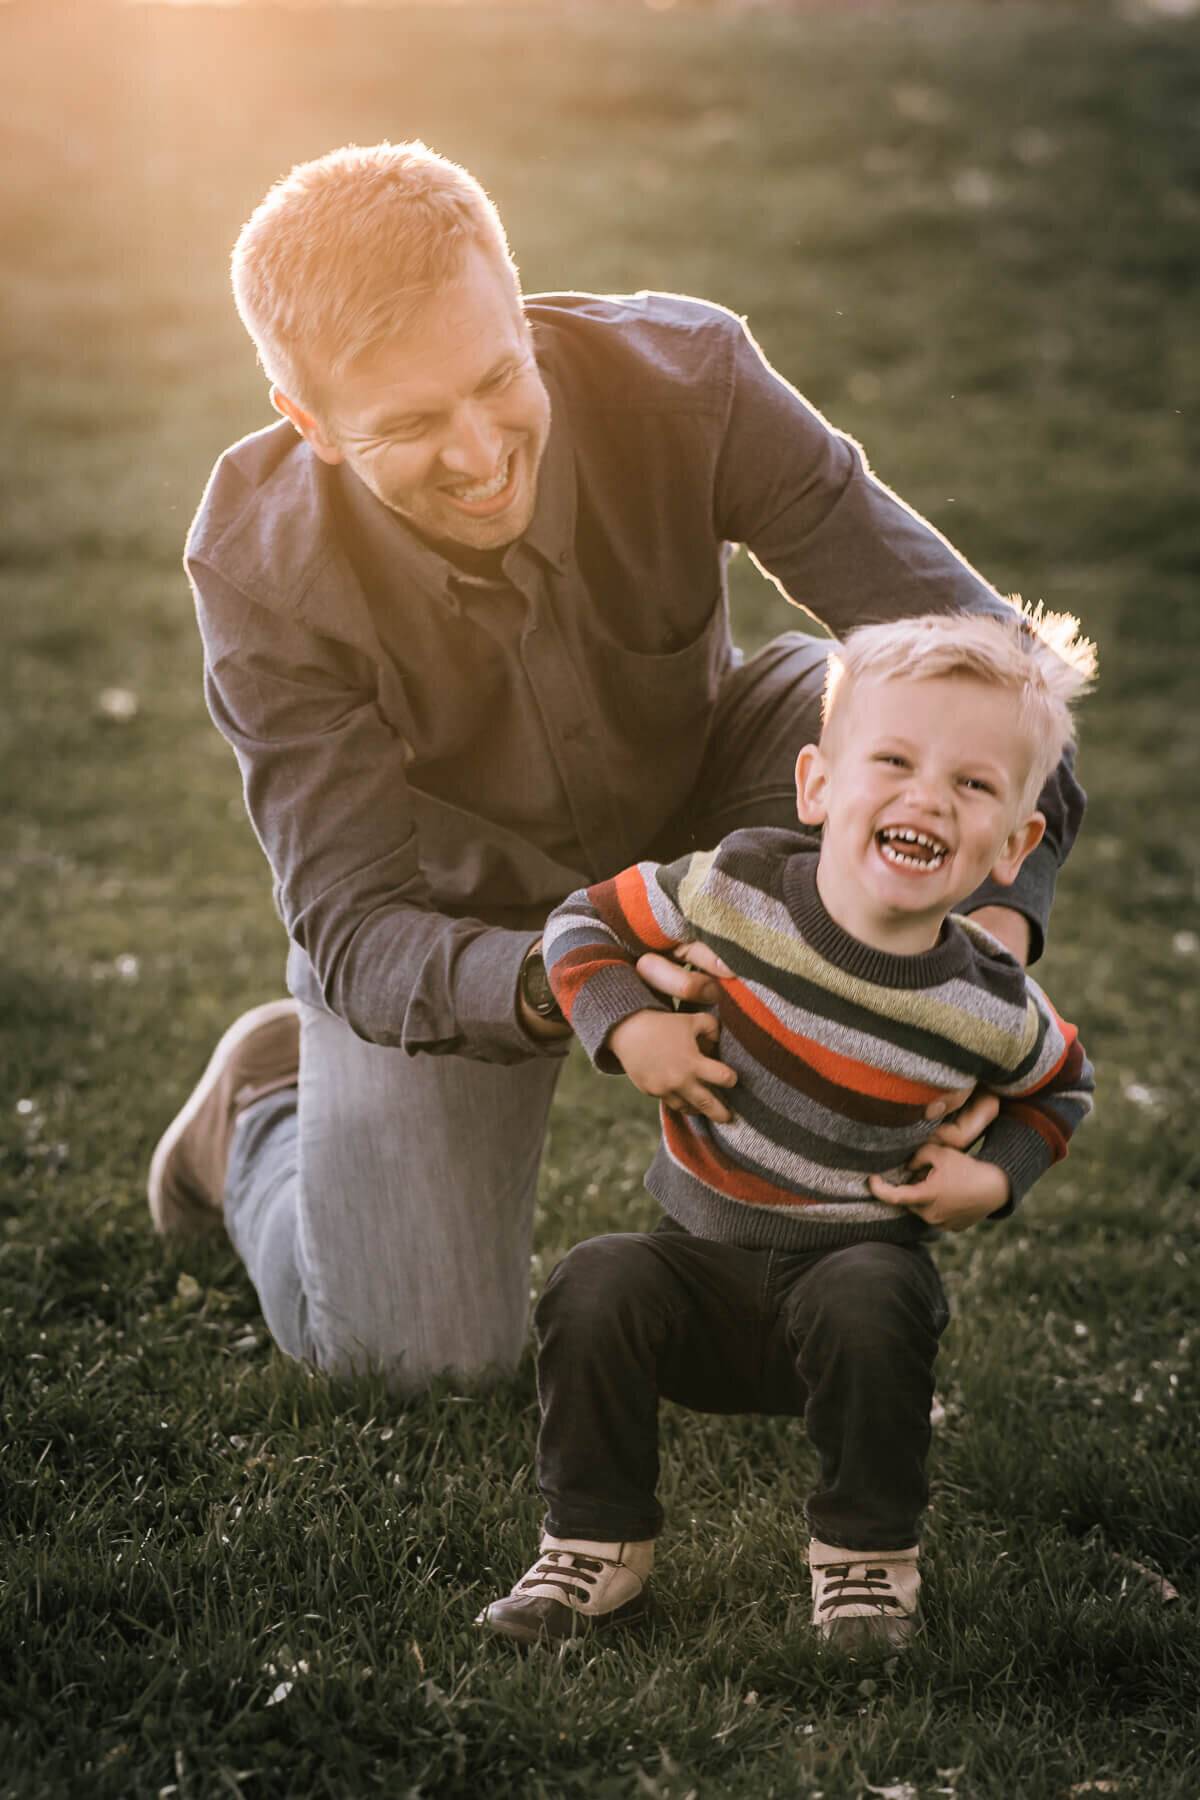 A small boy laughs as his father kneels down and tickles him from behind, as a sun flare illuminates the top left of the image.